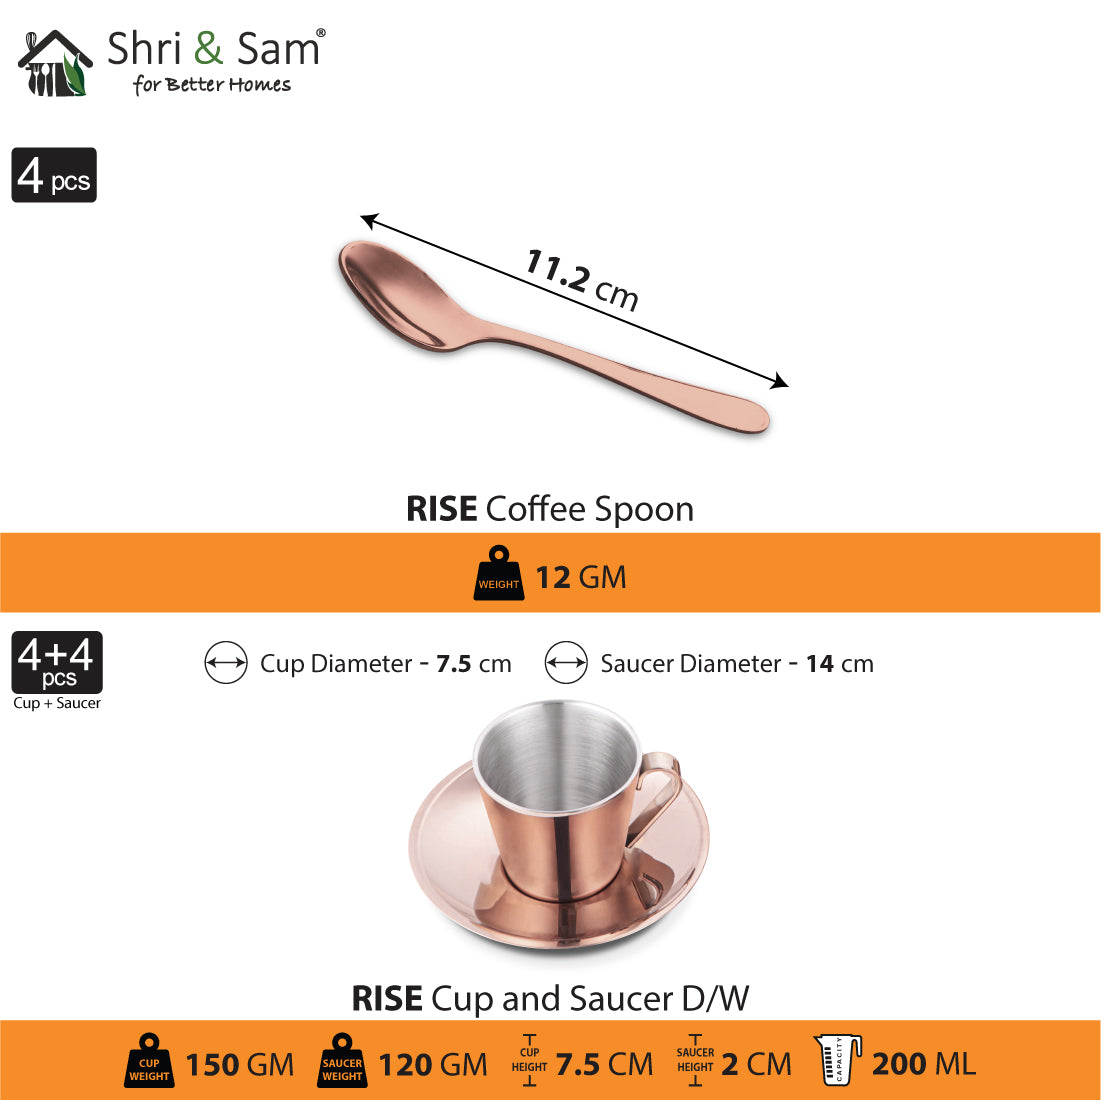 Stainless Steel 4 PCS Double Wall Cup and Saucer with Rose Gold PVD Coating Rise